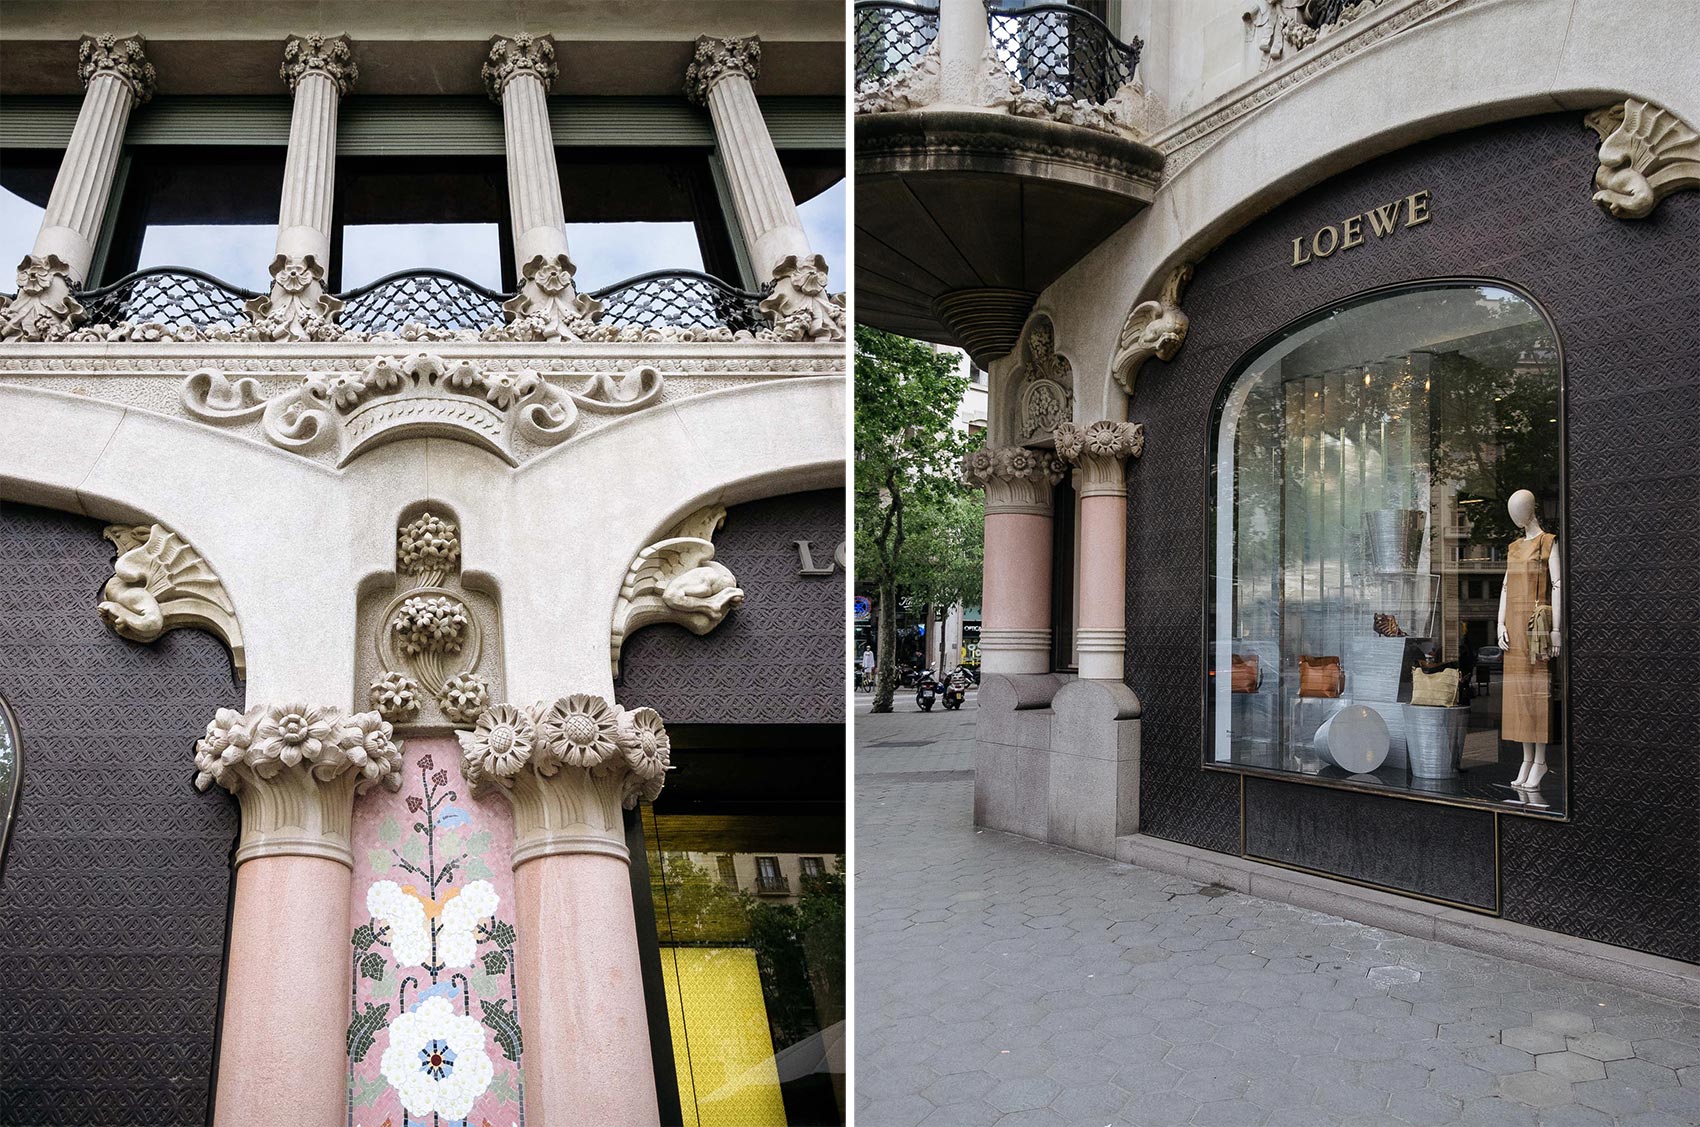 Spanish leather heritage house Loewe is located in a historic art nouveau building in the same Passeig de Gracia block as Gaudí's Casa Batlló 